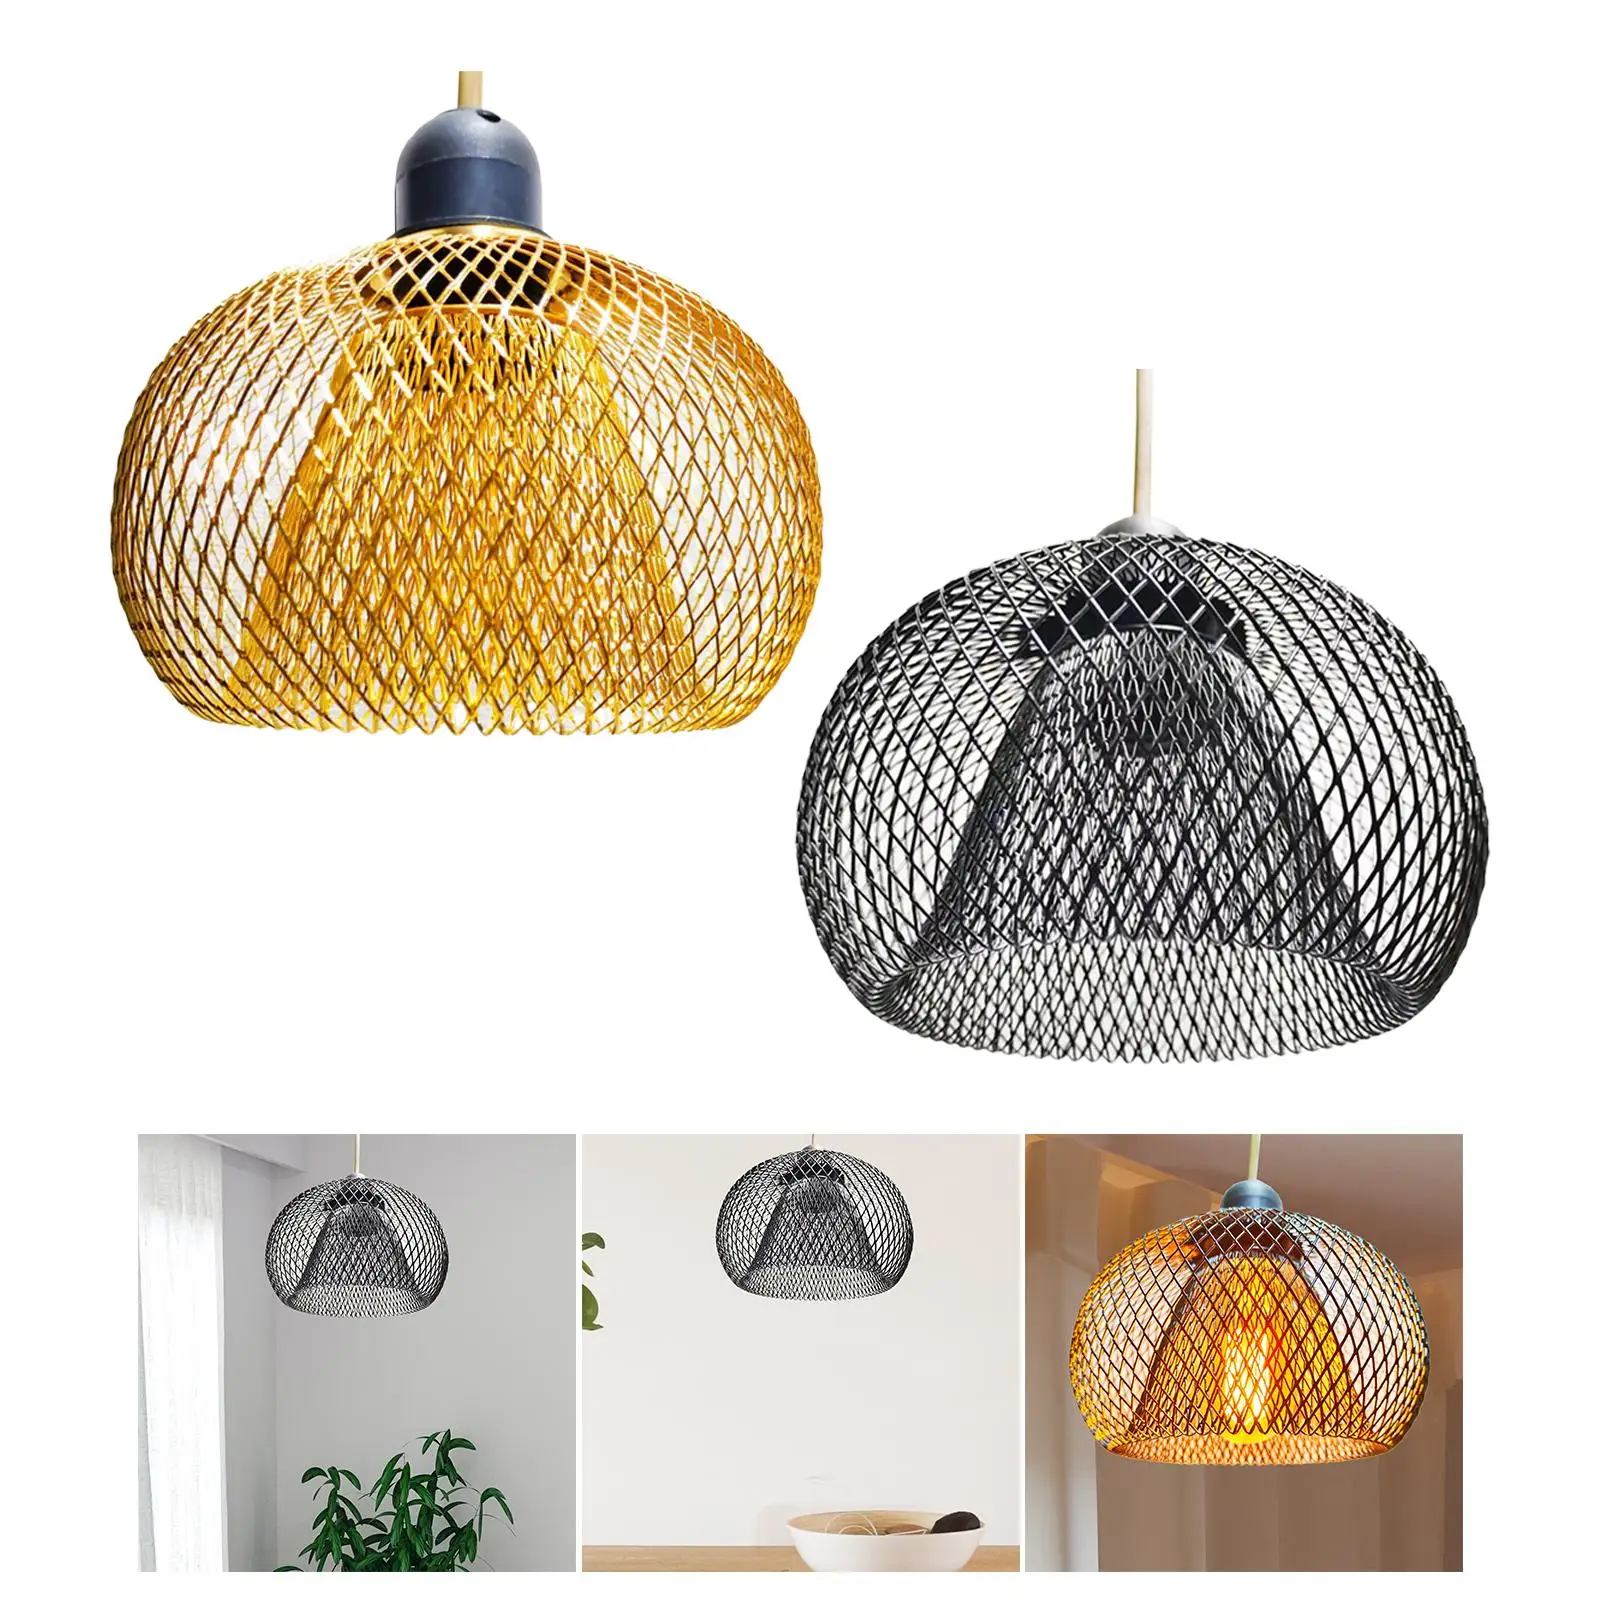 Metal Pendant Light Shades, Light Cover, Metal Wire Cage Lamp Guards for Home